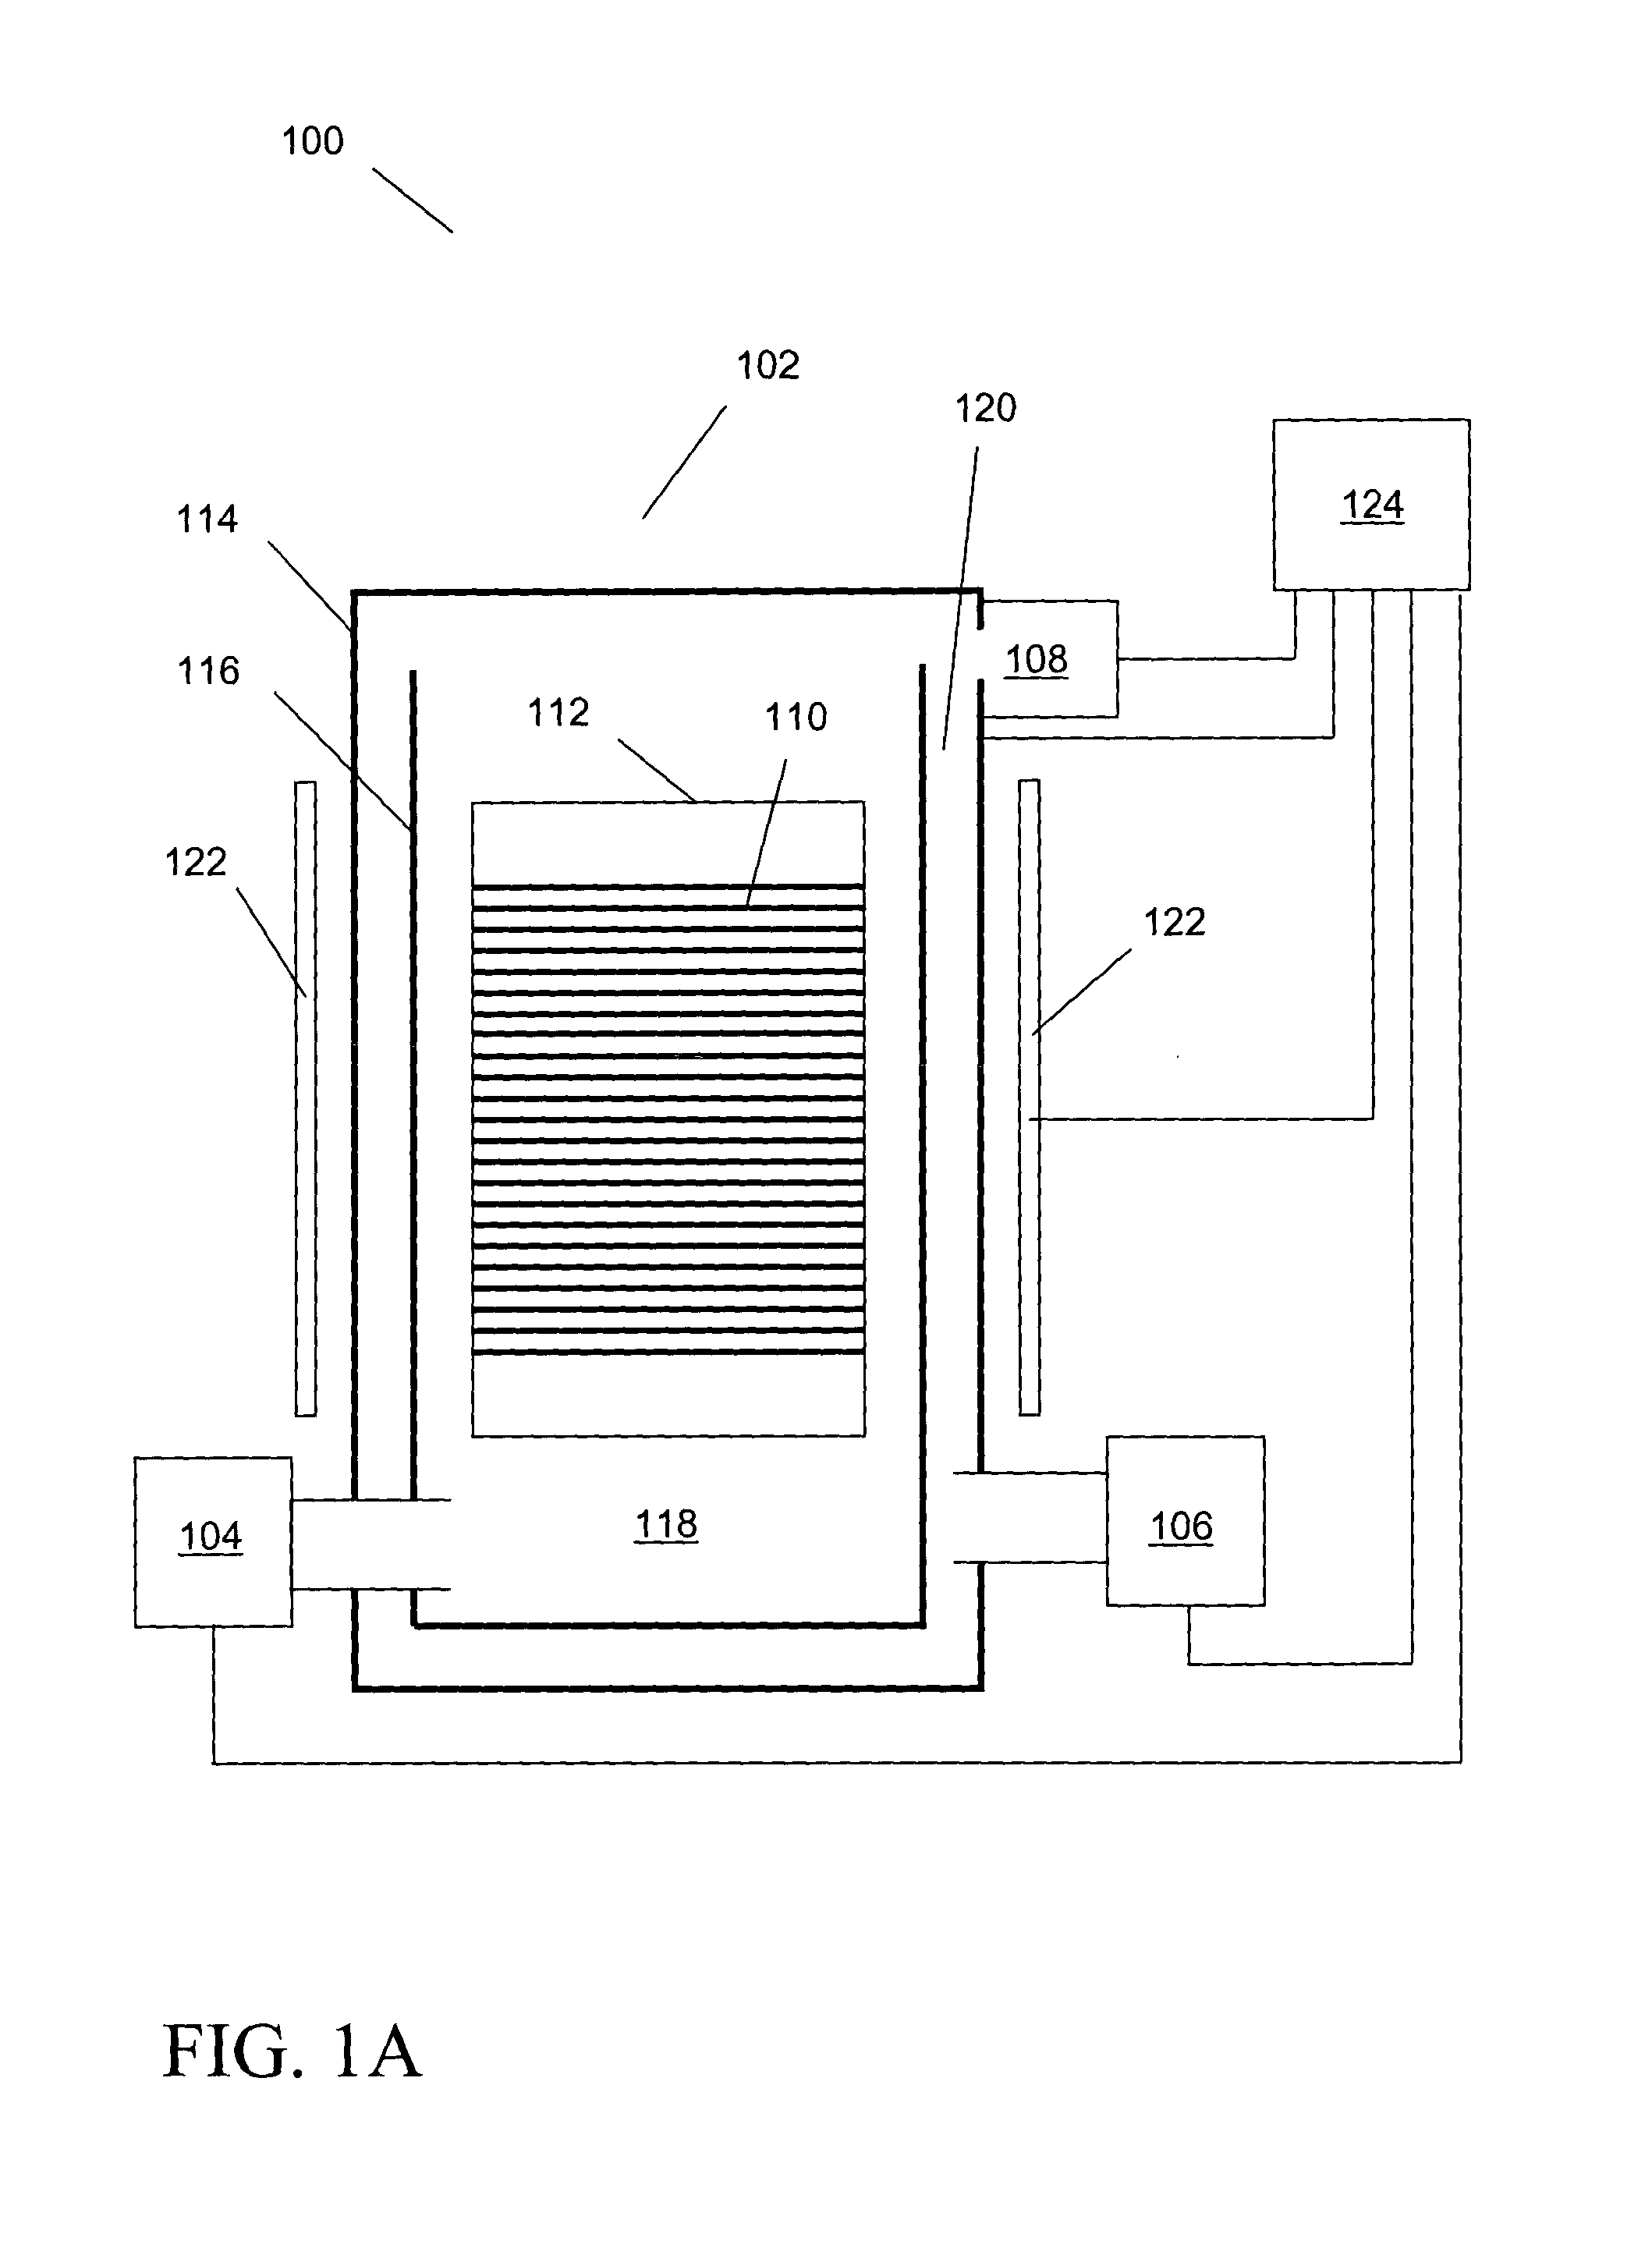 Formation of a metal-containing film by sequential gas exposure in a batch type processing system